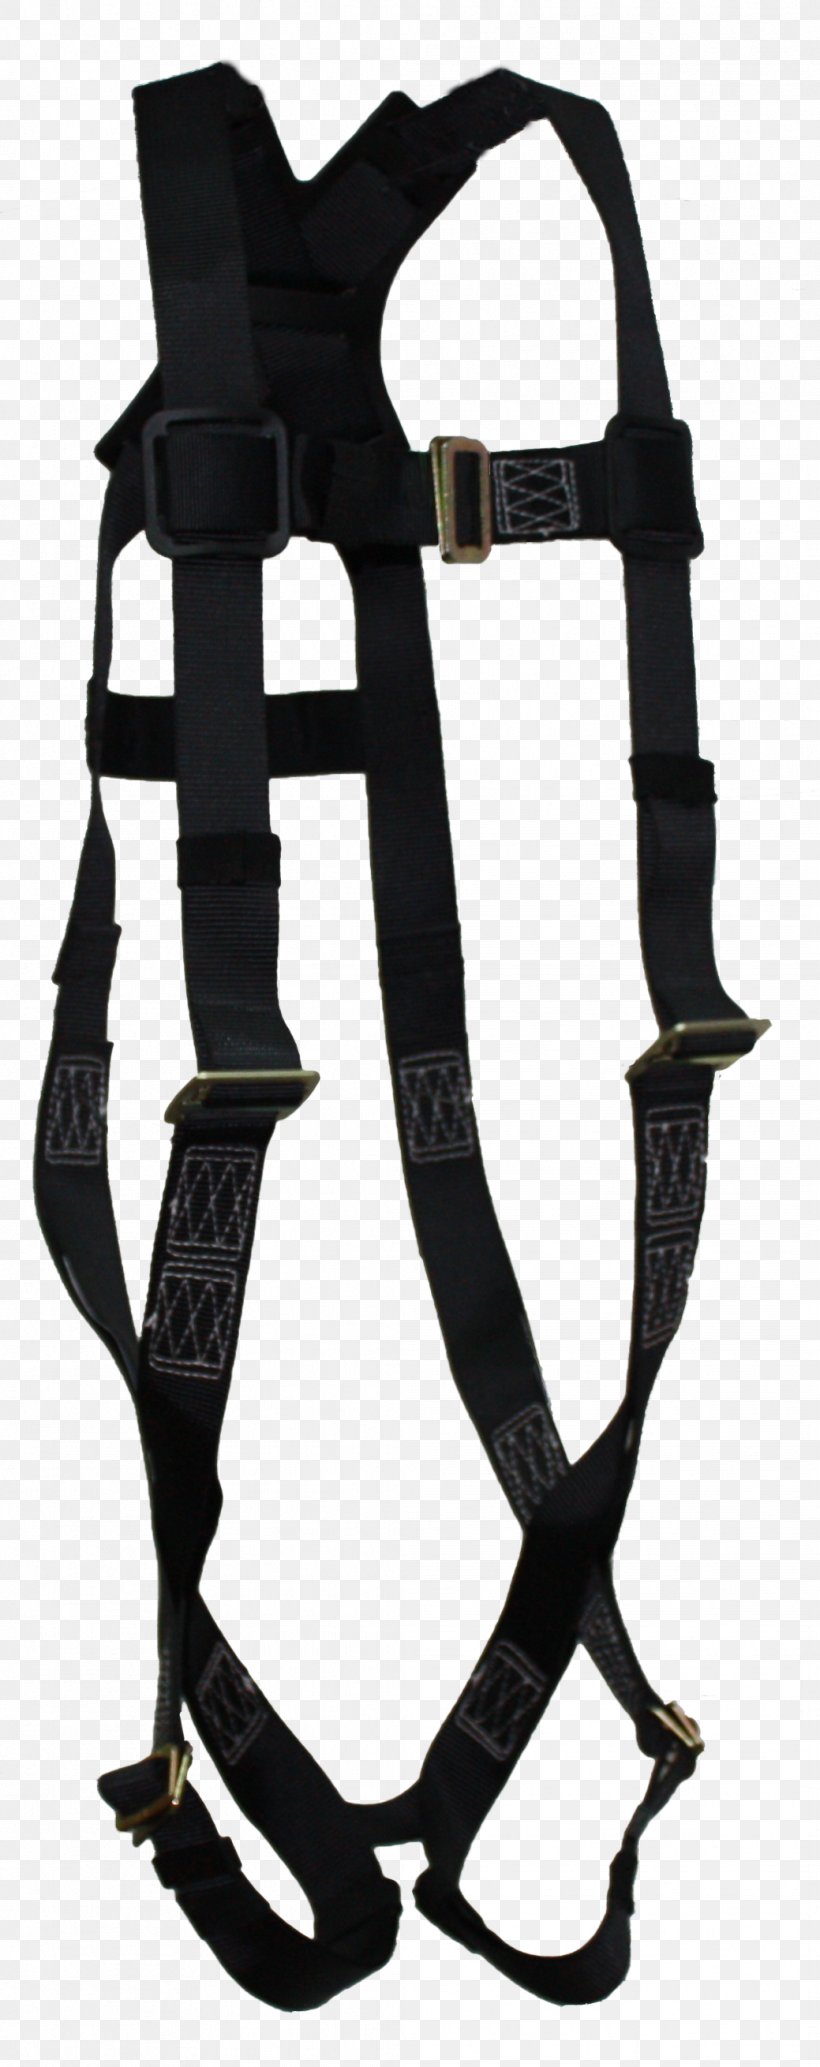 Climbing Harnesses Safety Harness Personal Protective Equipment D-ring, PNG, 1039x2620px, Climbing Harnesses, Belt, Body Harness, Buckle, Climbing Download Free